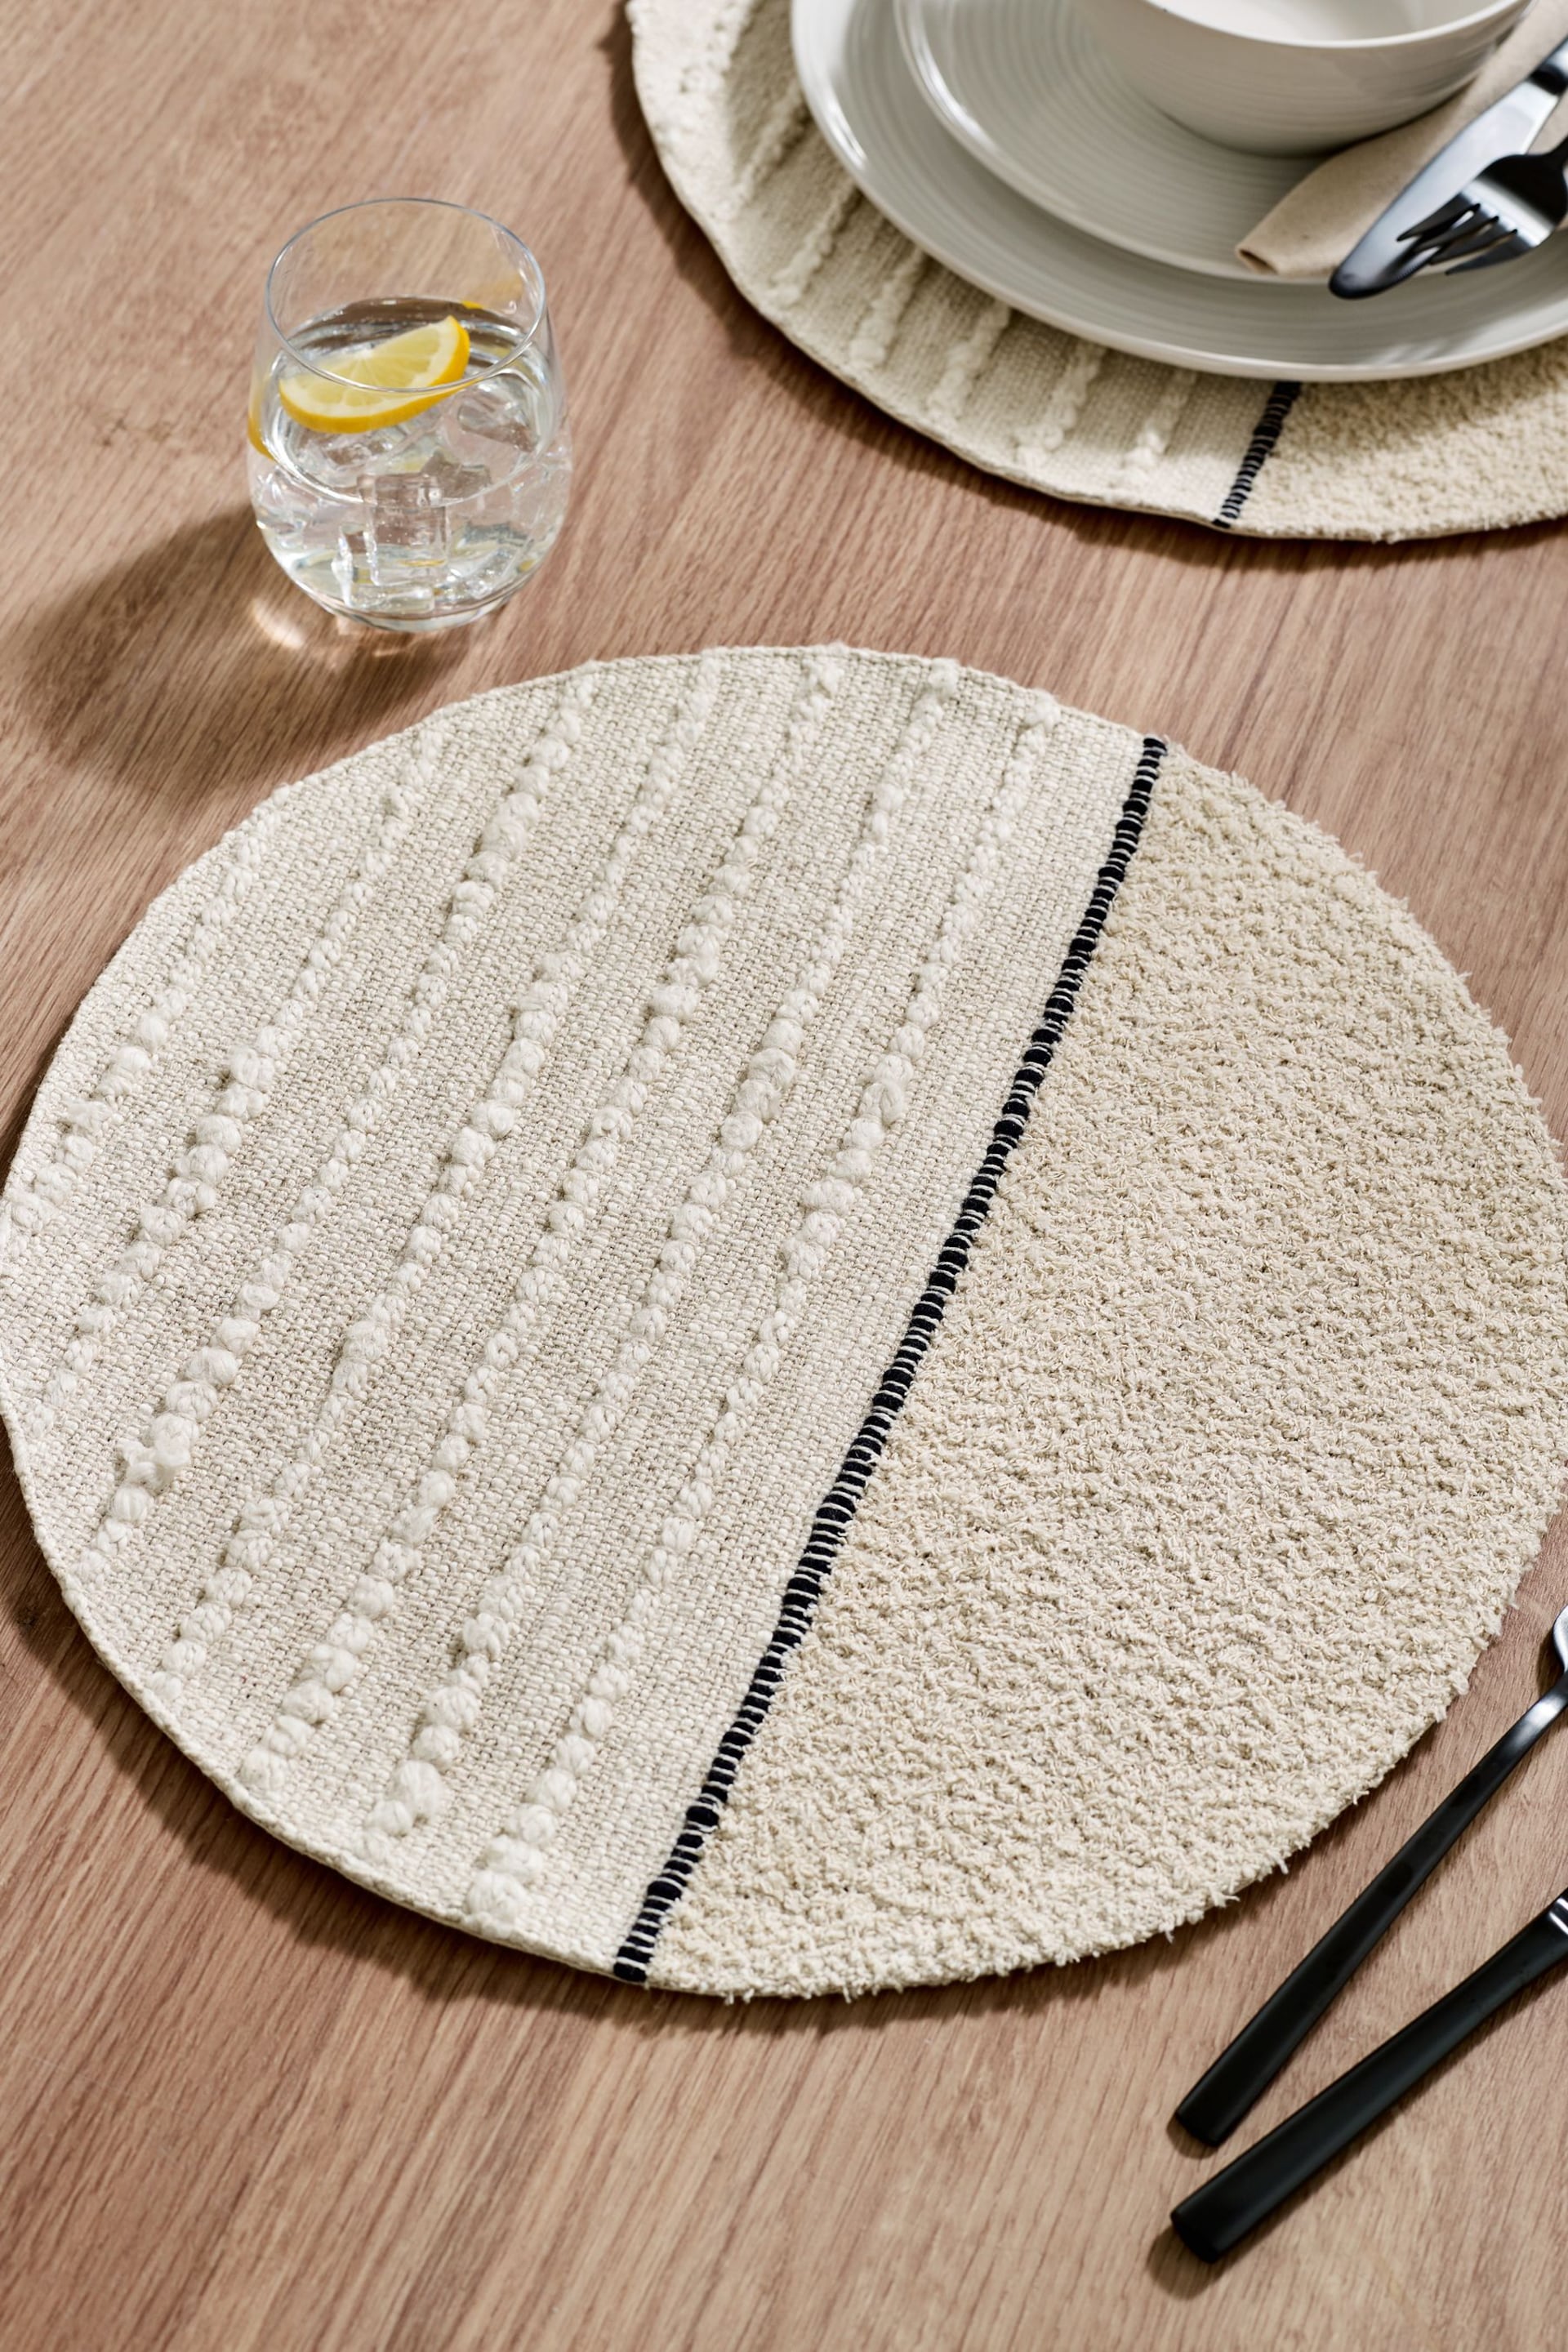 Set of 2 Cream Boucle Fabric Placemats - Image 2 of 4